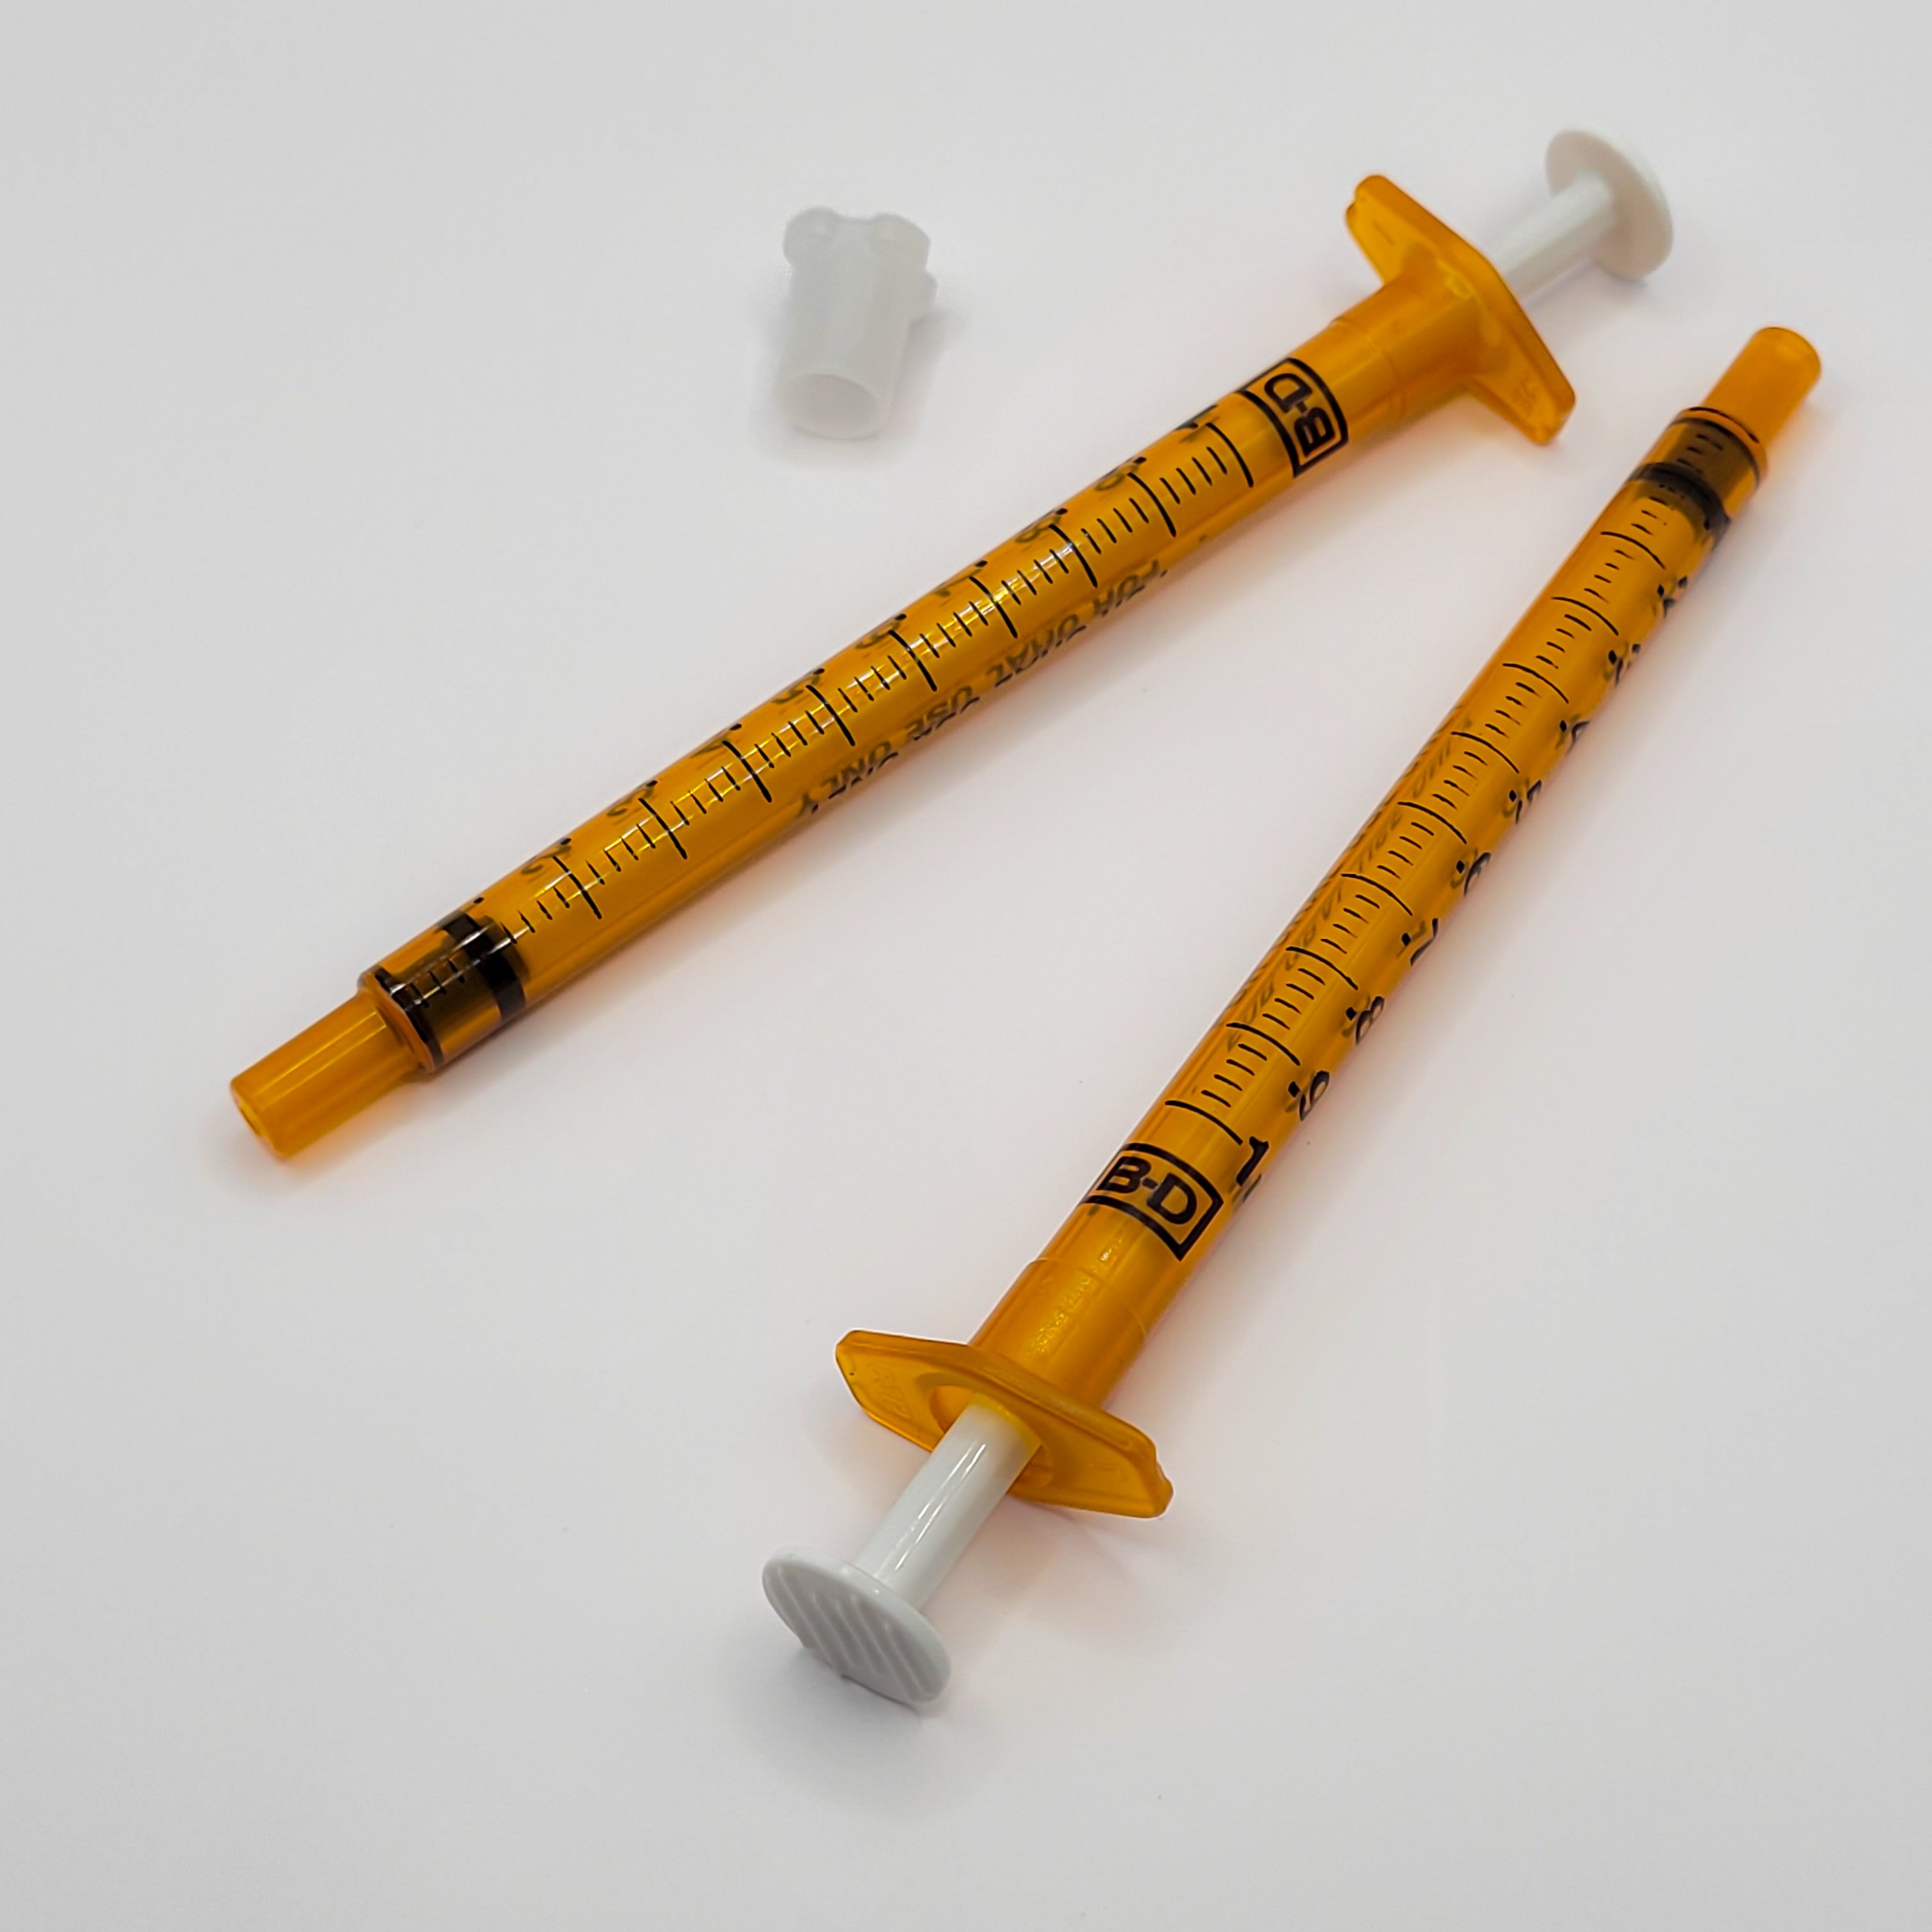 BD Amber Oral Syringes with tips (1ml)